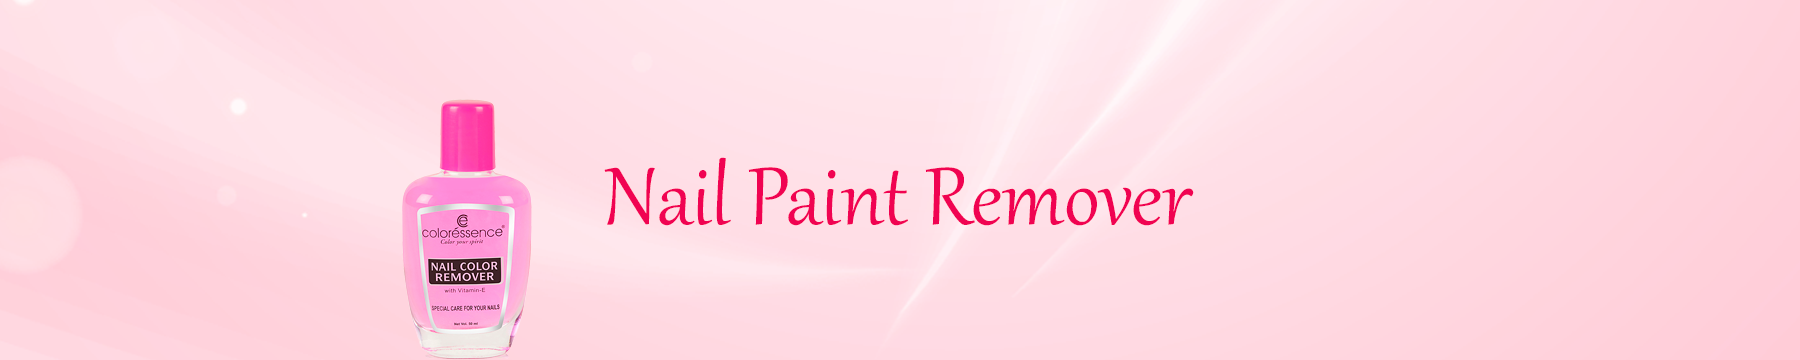 Nail Paint Remover